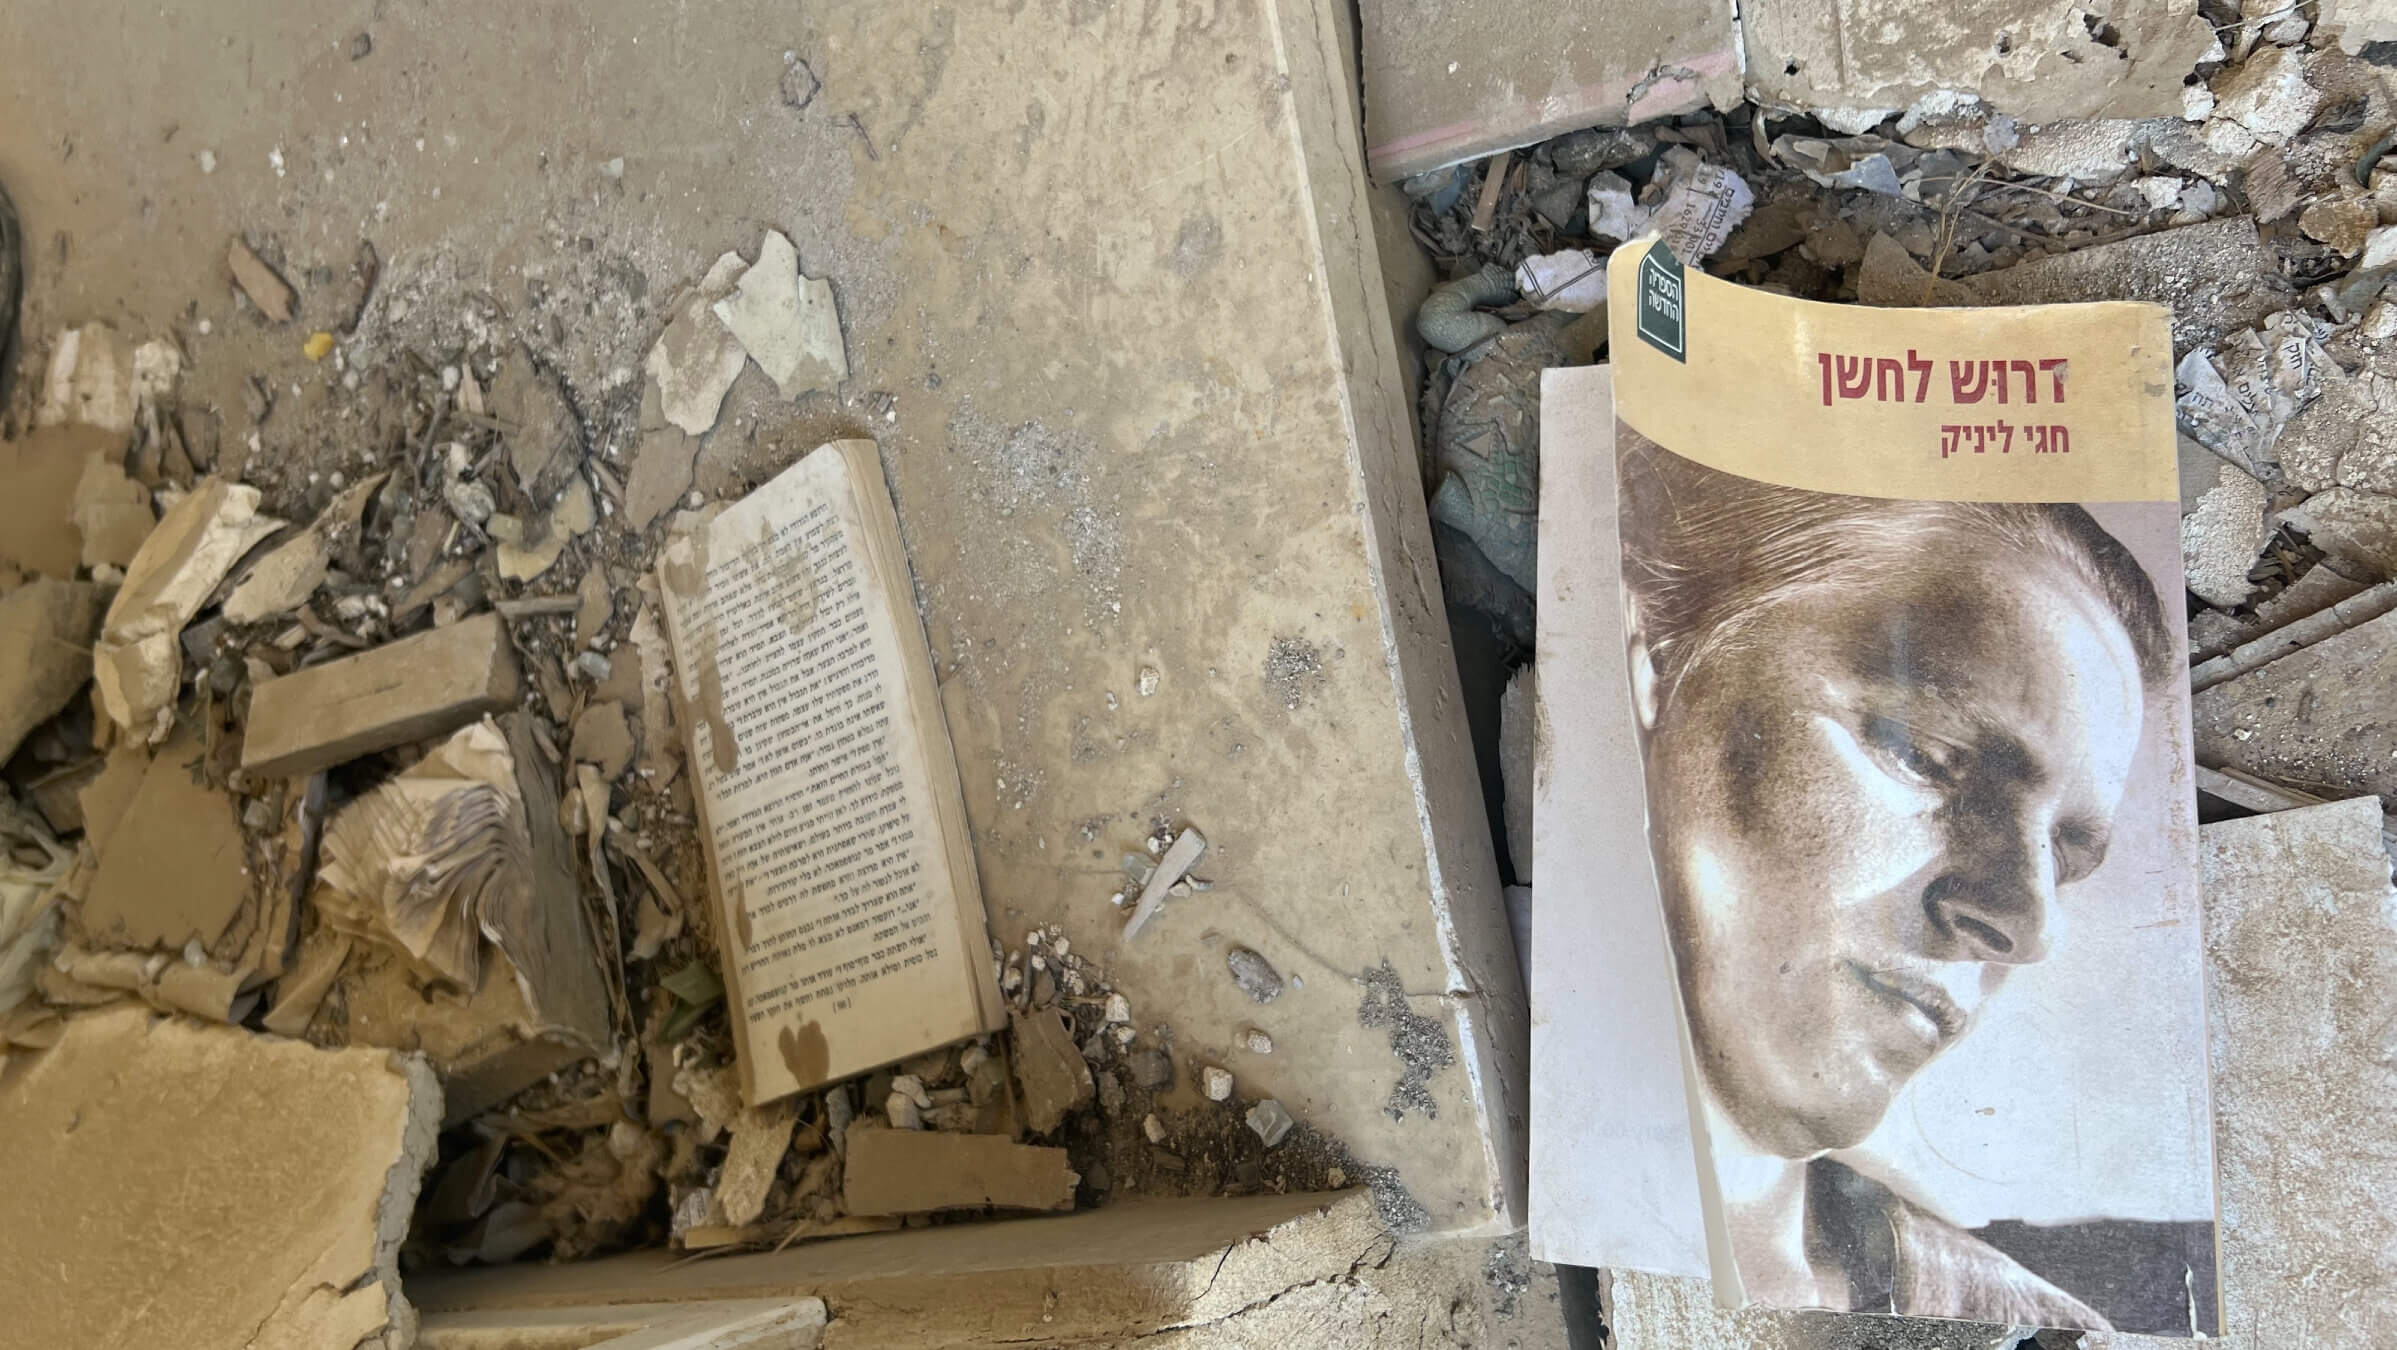 The book the Laura E. Adkins found in the rubble of Kibbutz Be'eri on Oct. 20, 2023 